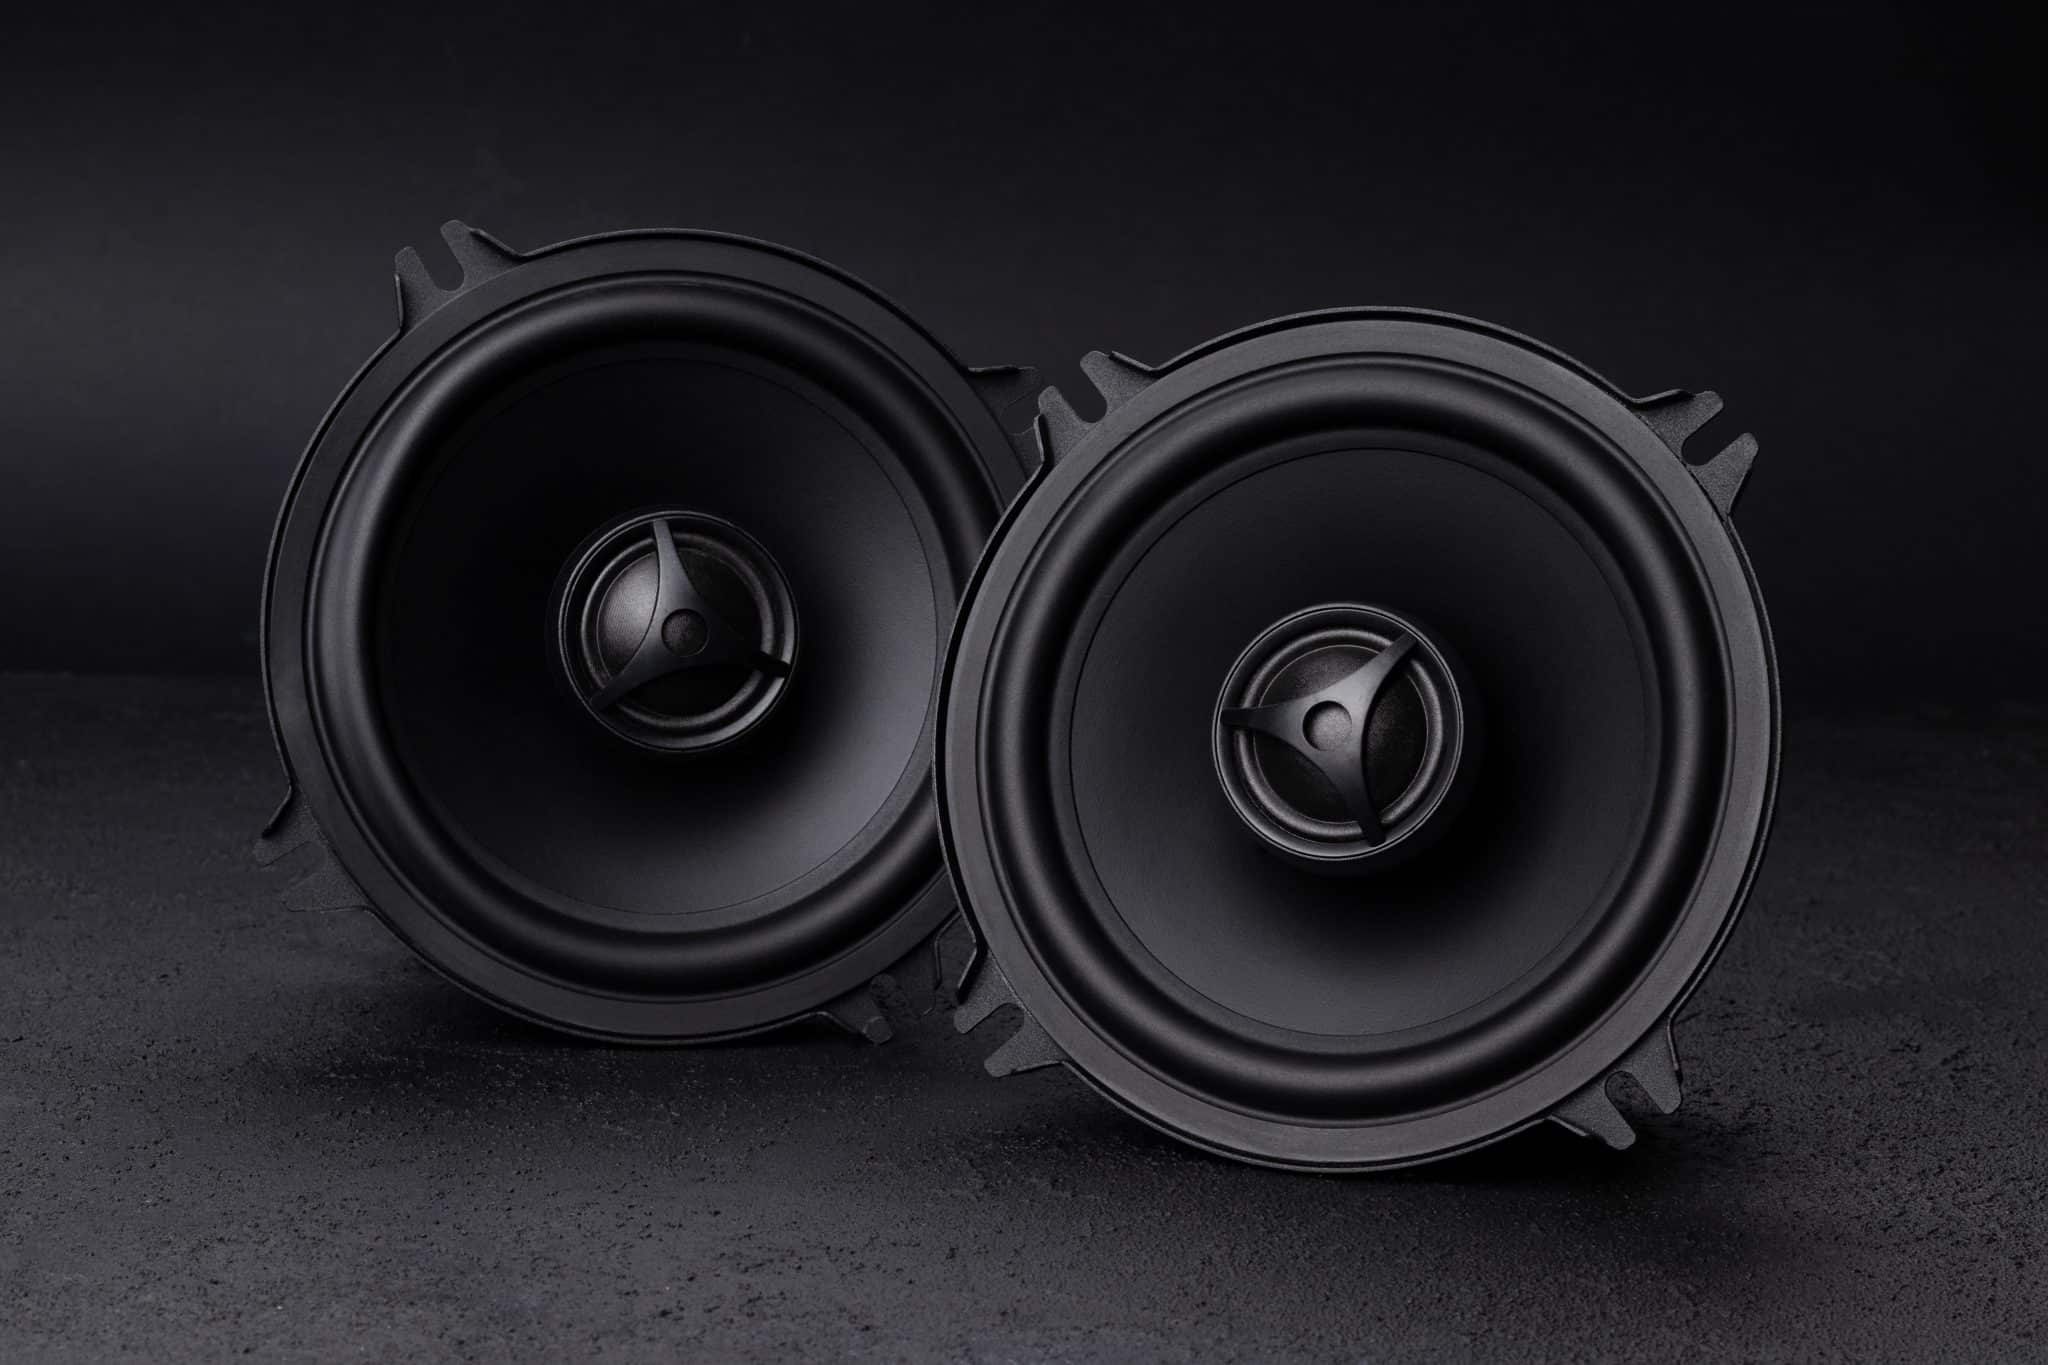 A pair of car audio speakers on a dark background.